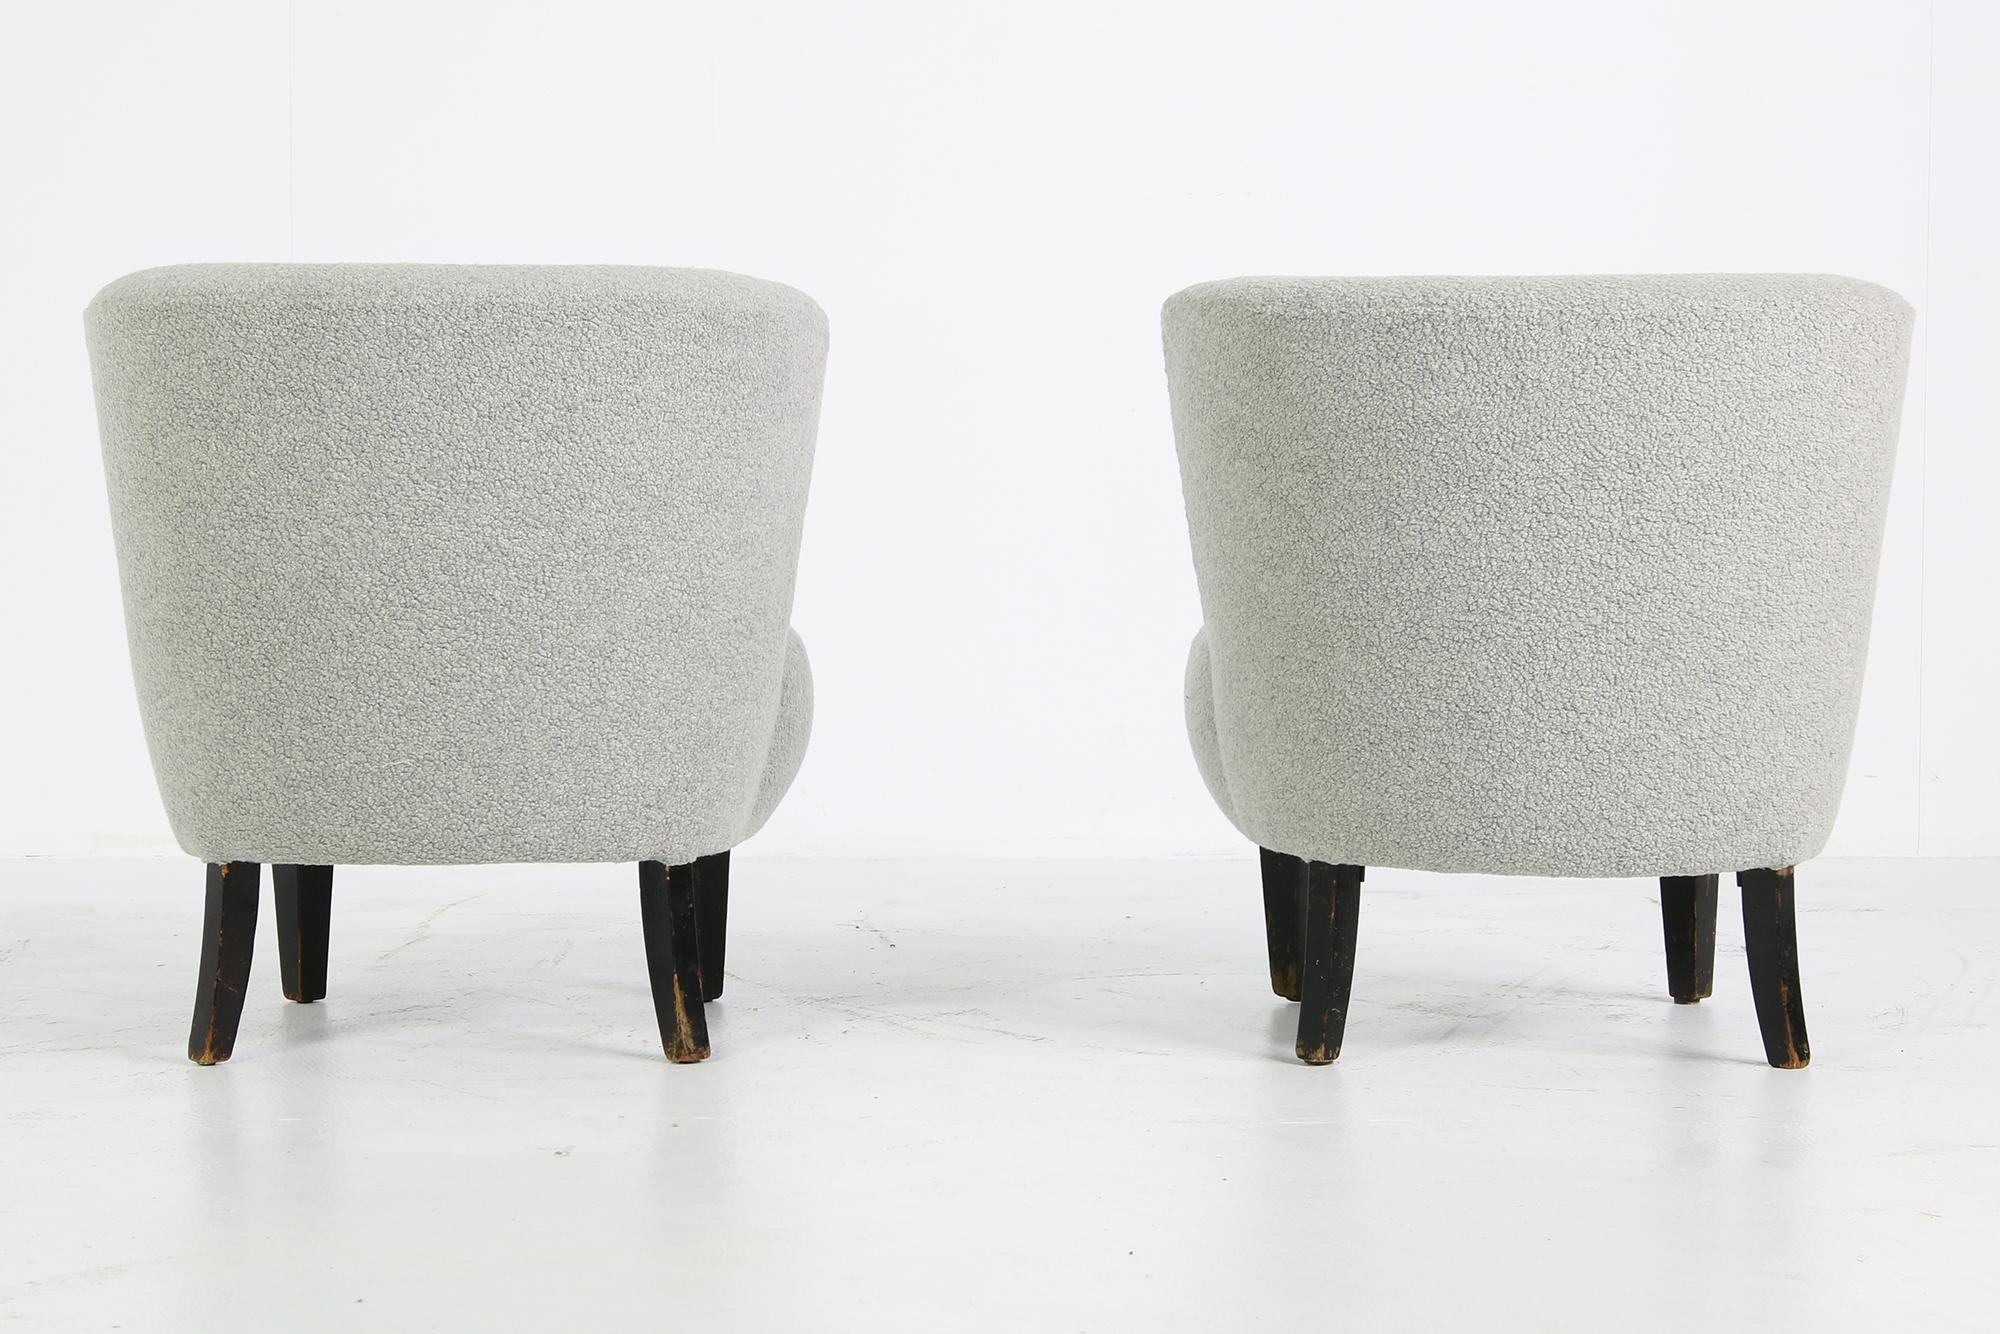 Swedish Pair of Curved Mid-Century Lounge Clam Chairs, Sweden 1950s, Boucle Fur, grey